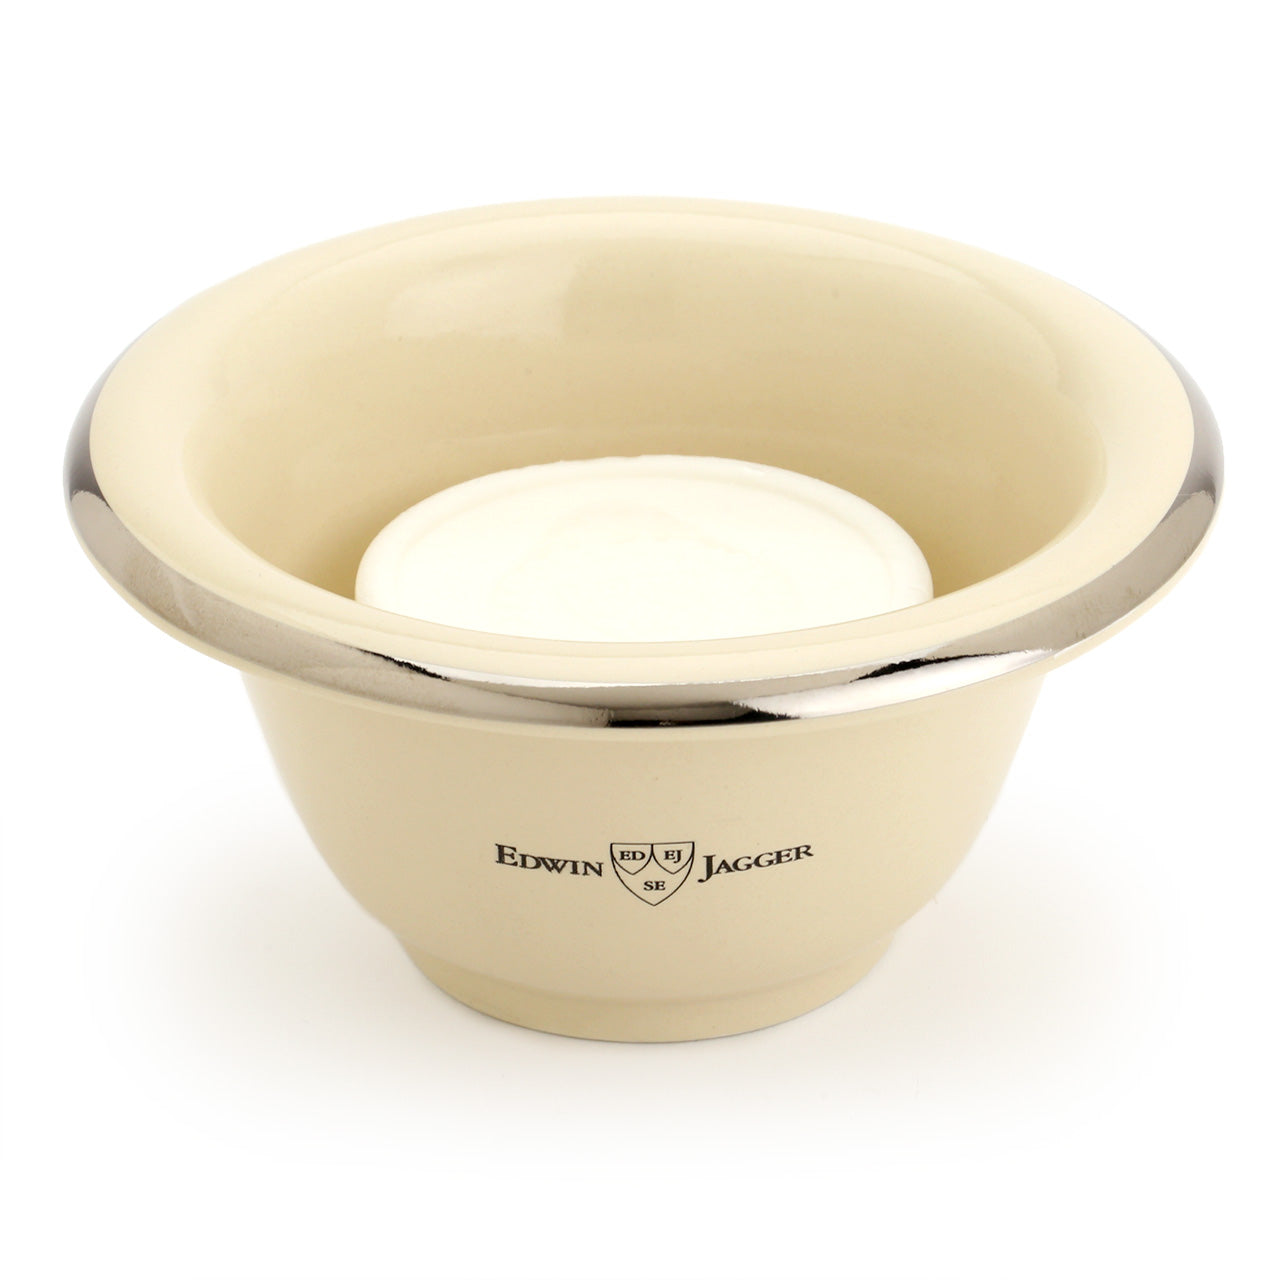 Edwin Jagger Ivory Lather Bowl - side view